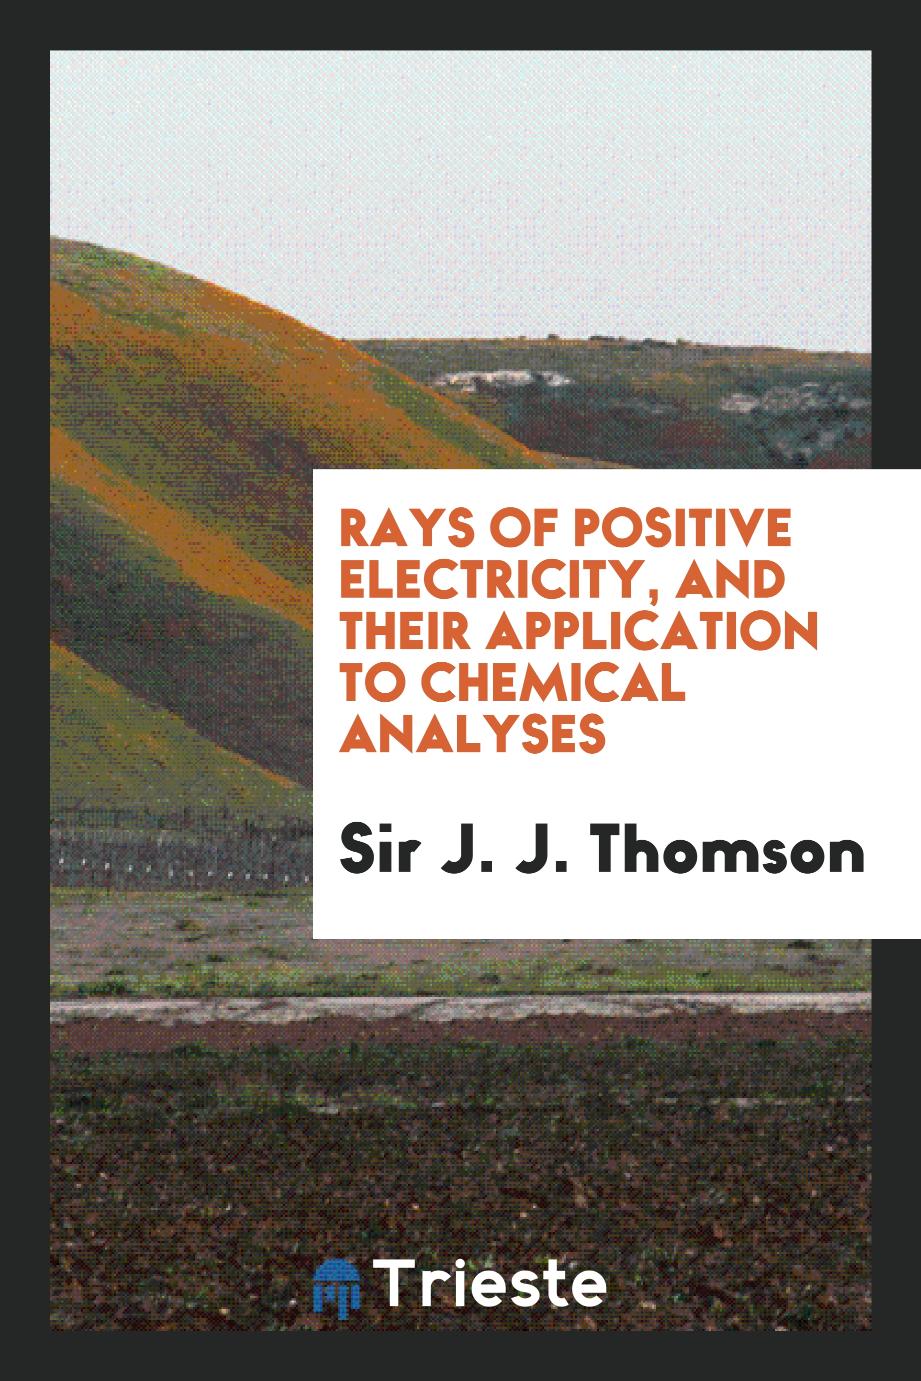 Rays of positive electricity, and their application to chemical analyses